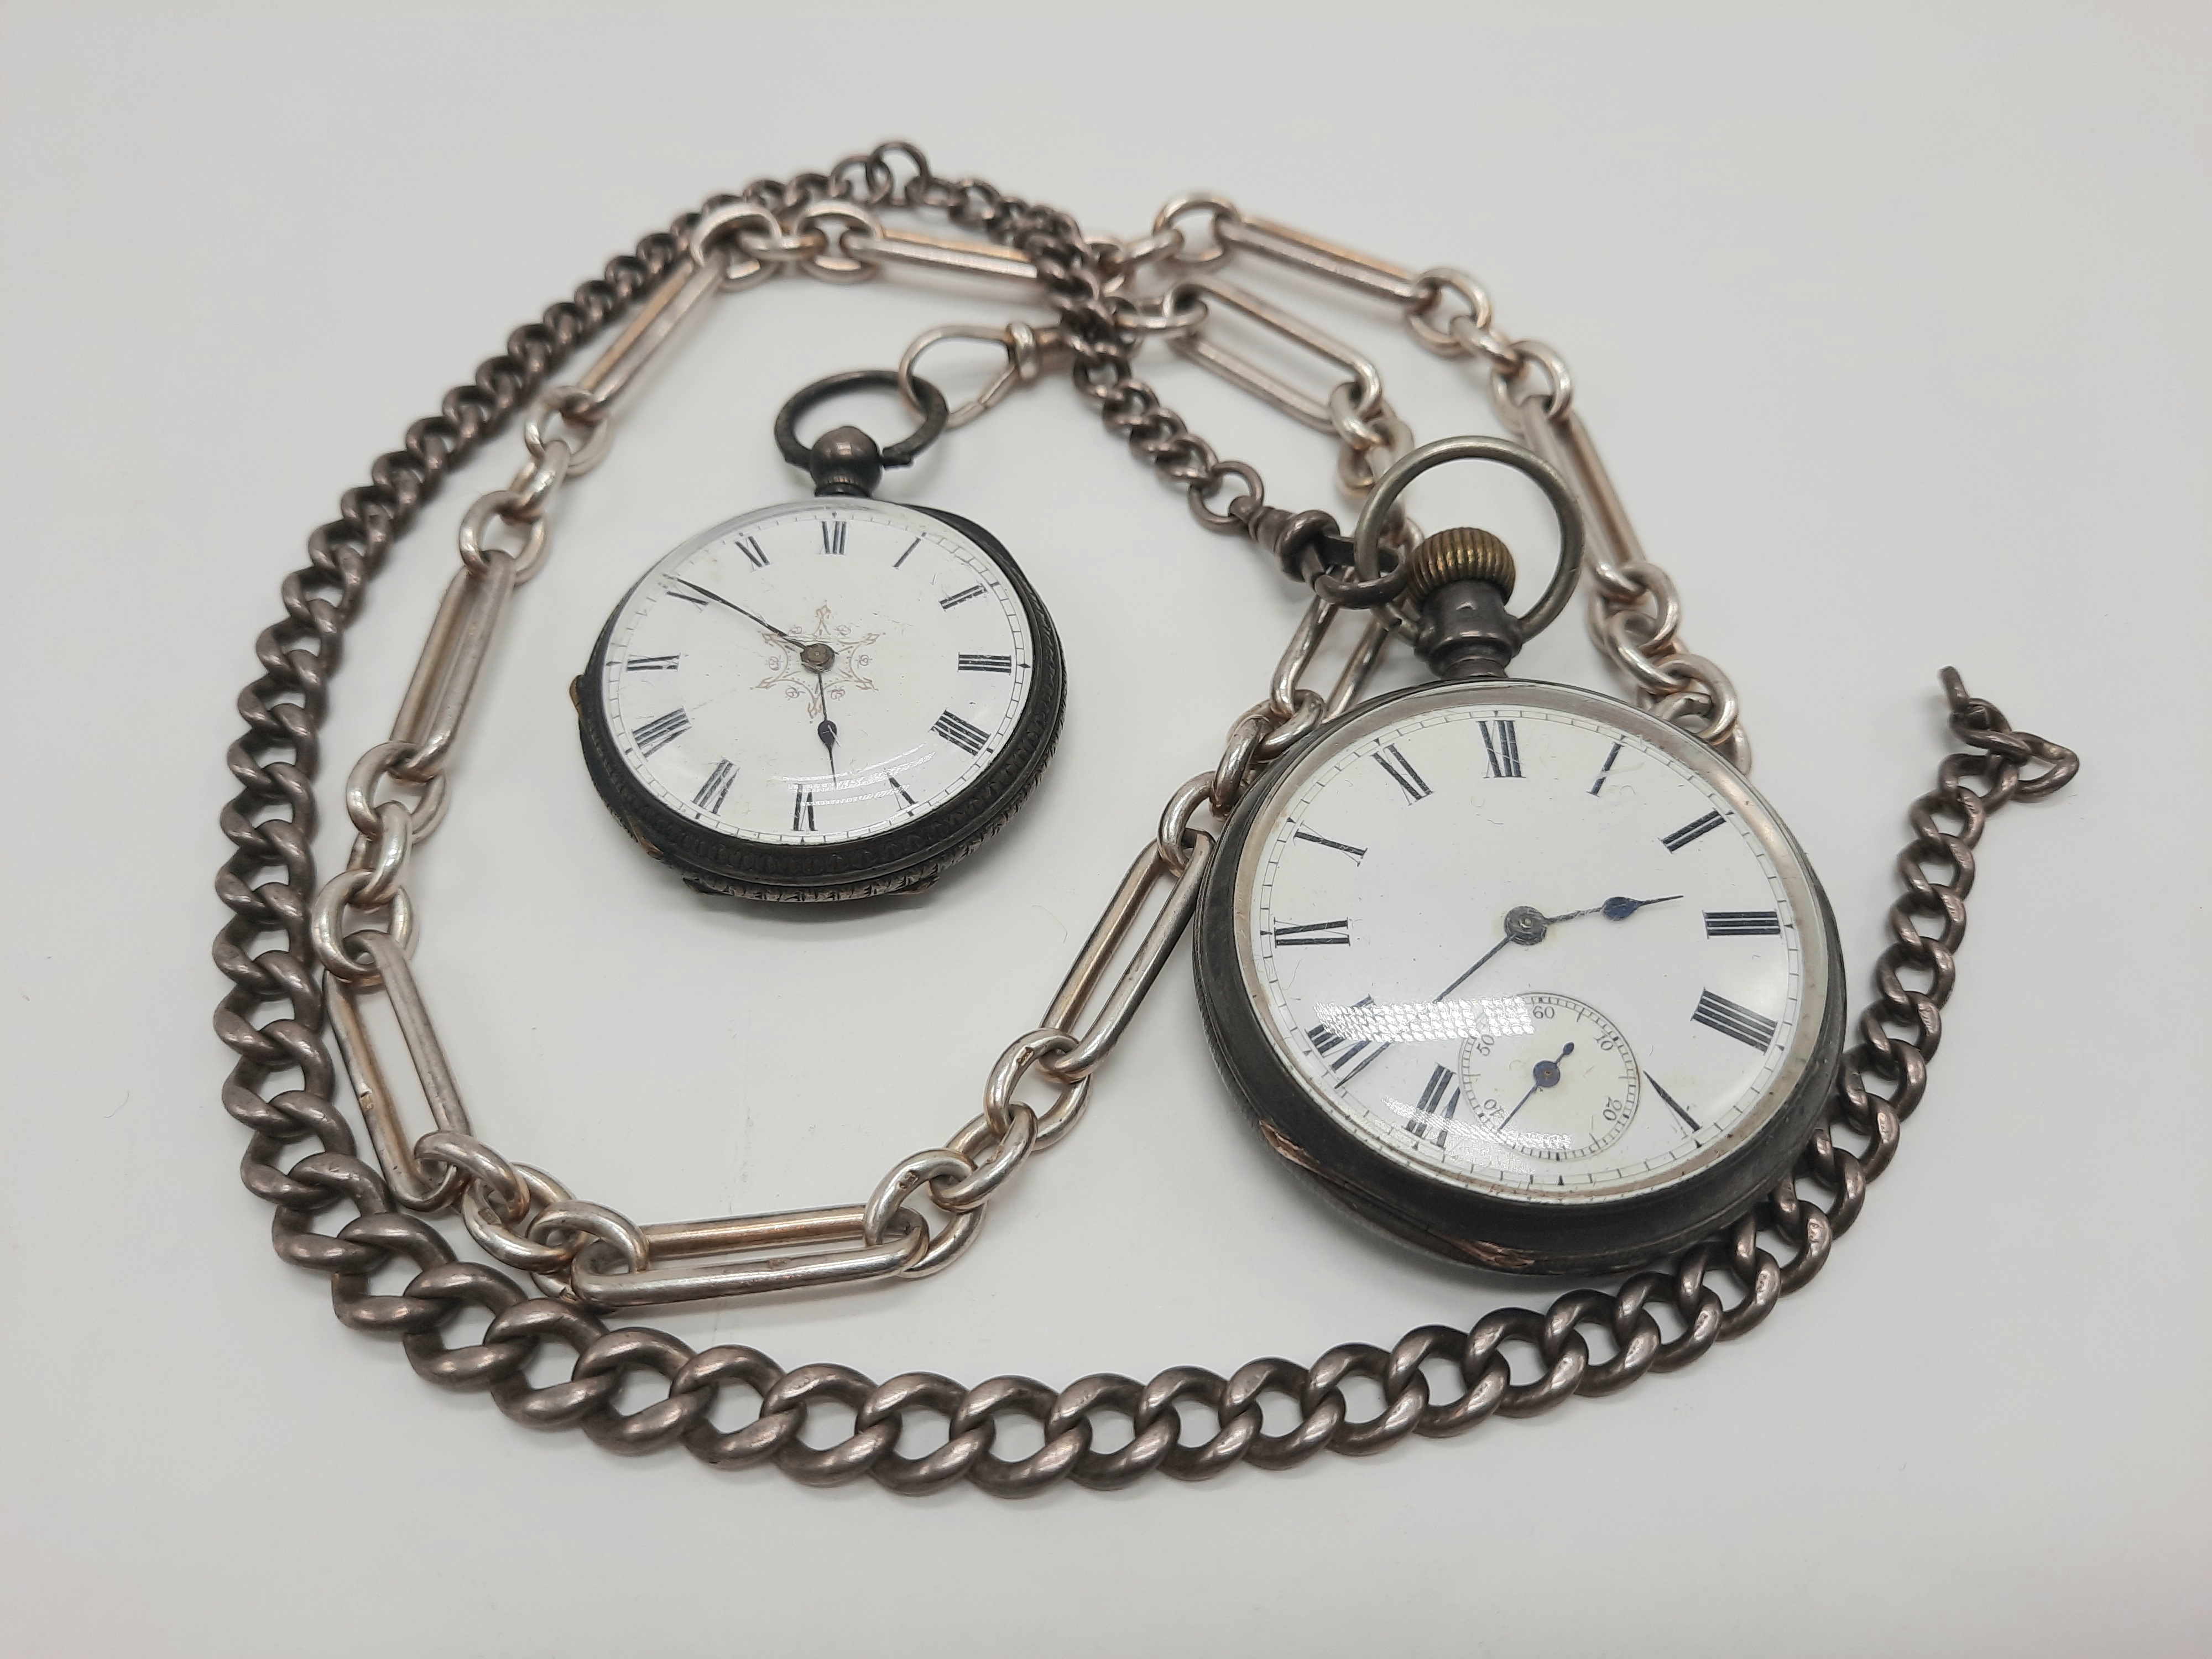 2 SILVER POCKET WATCHES & CHAINS